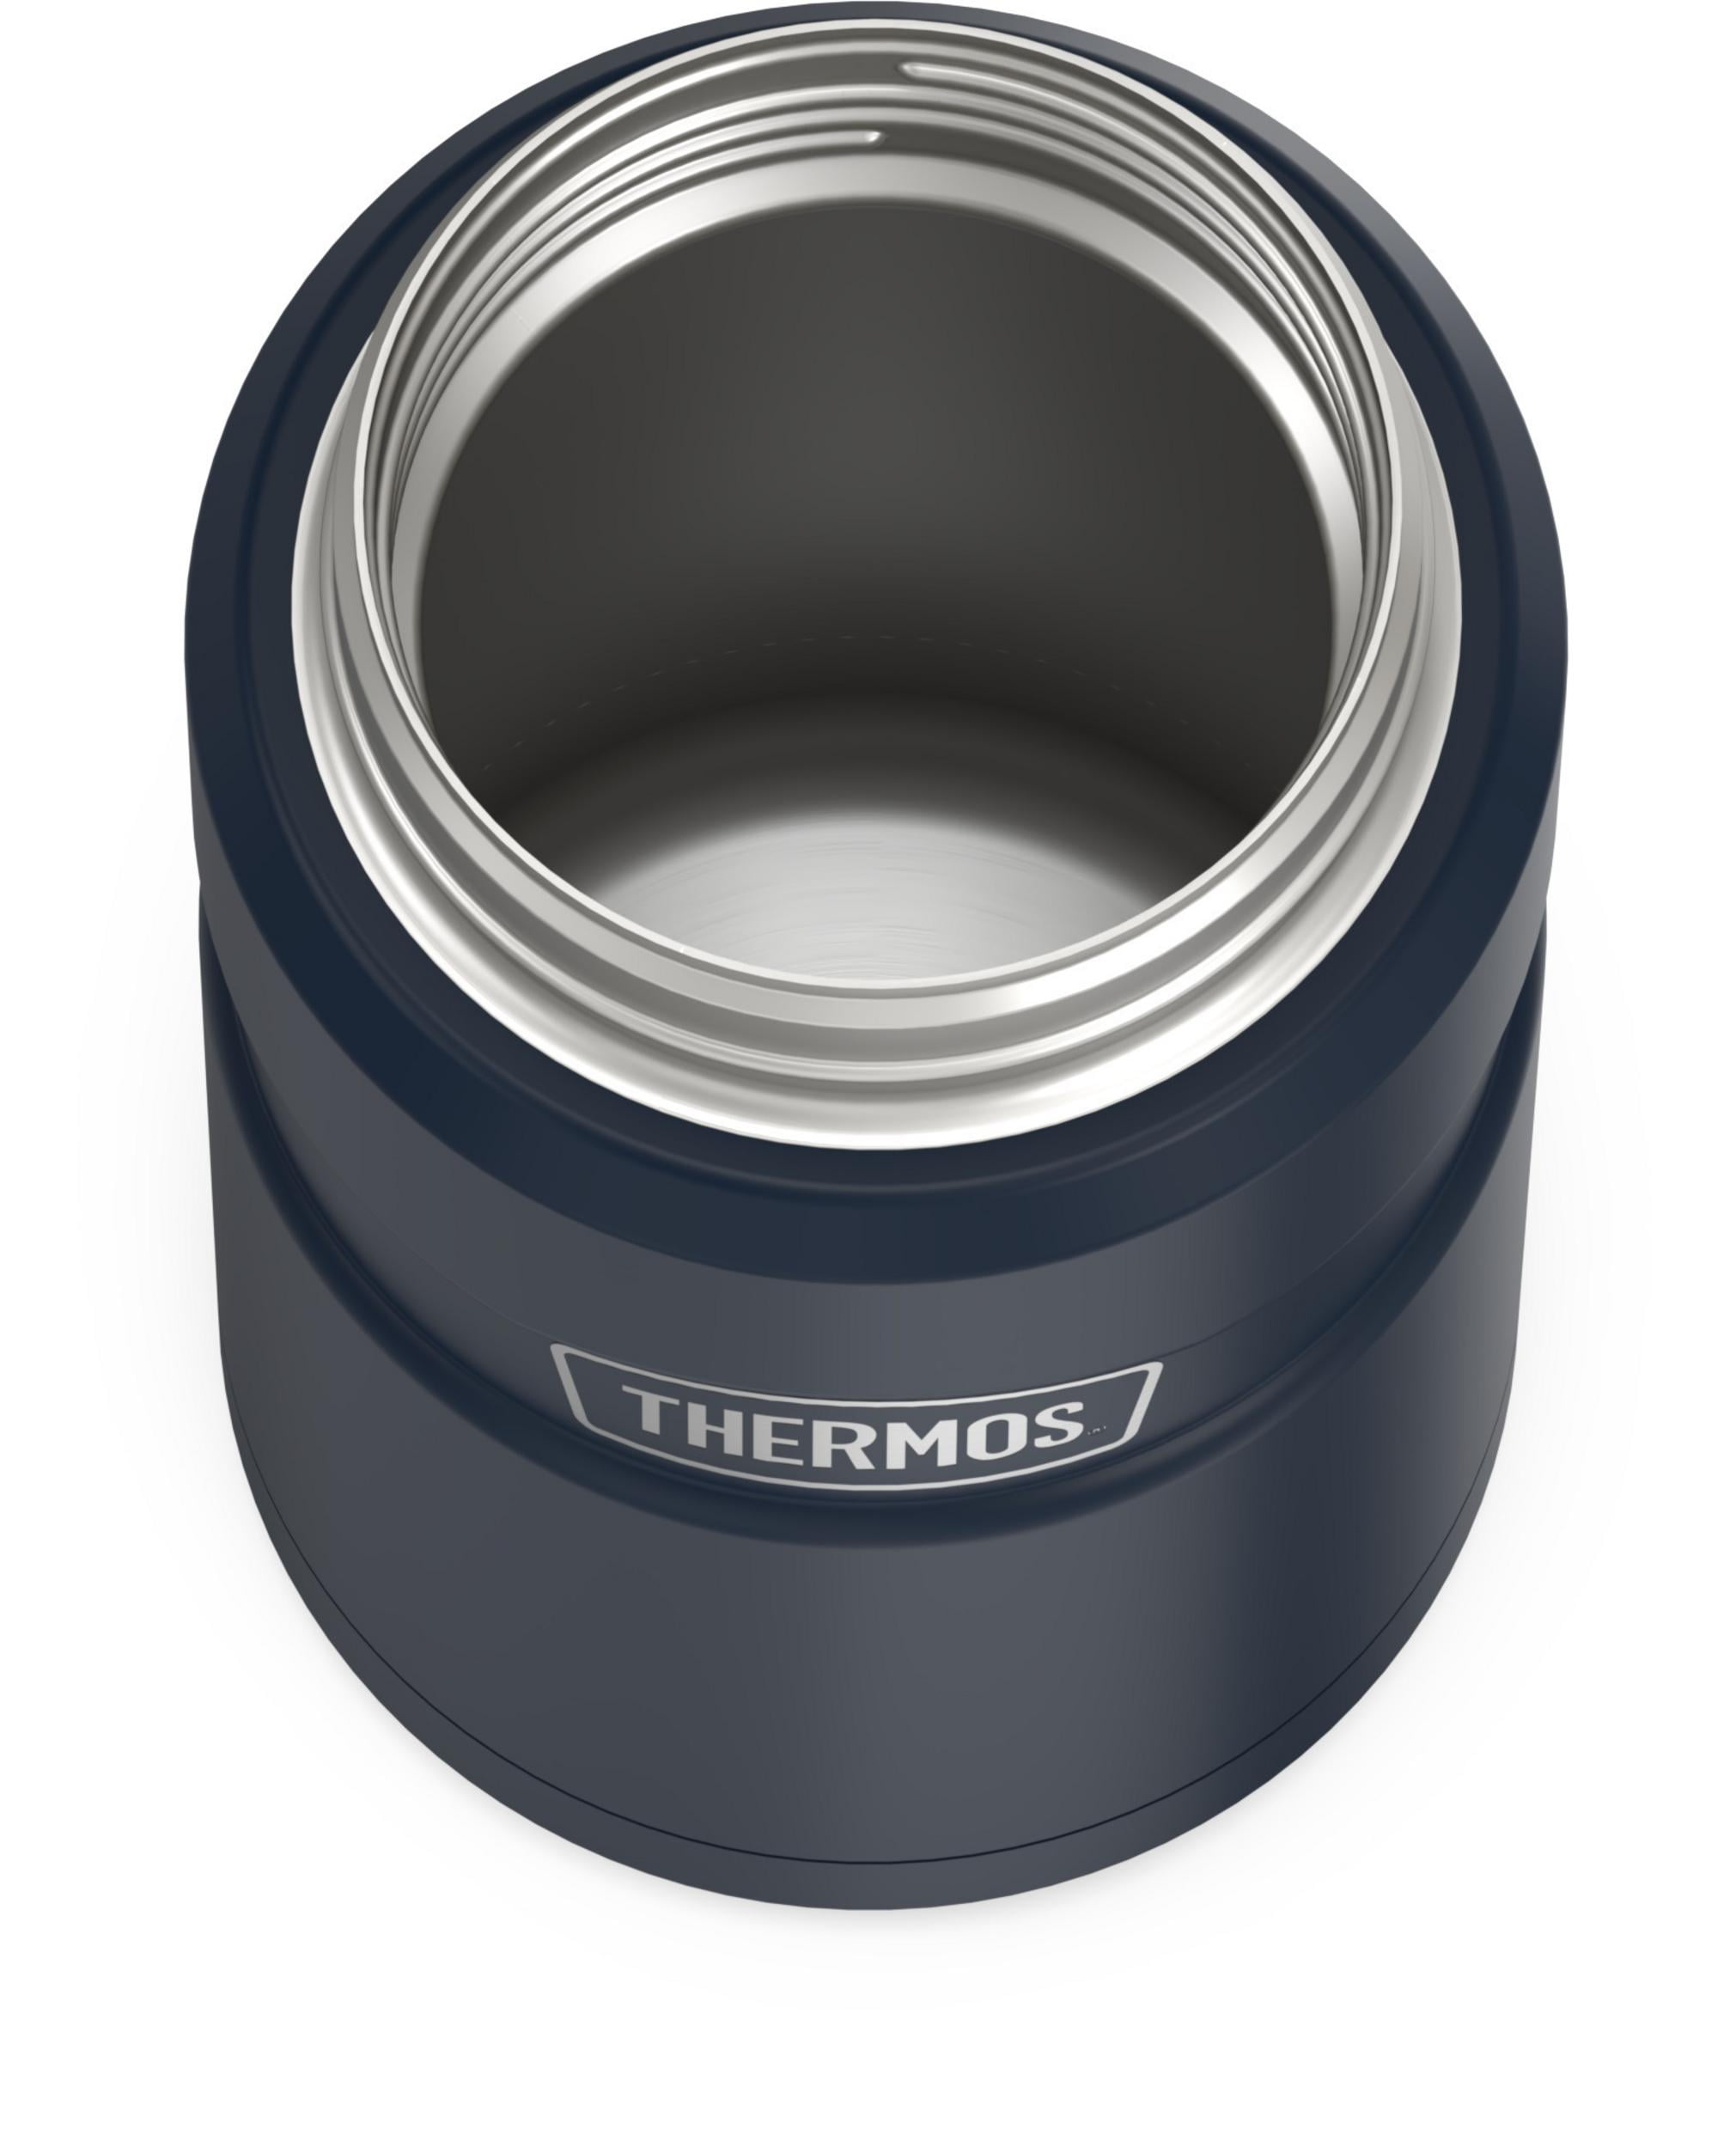 Thermos Stainless Steel Food Jar - Midnight Blue, 24 oz - Fry's Food Stores